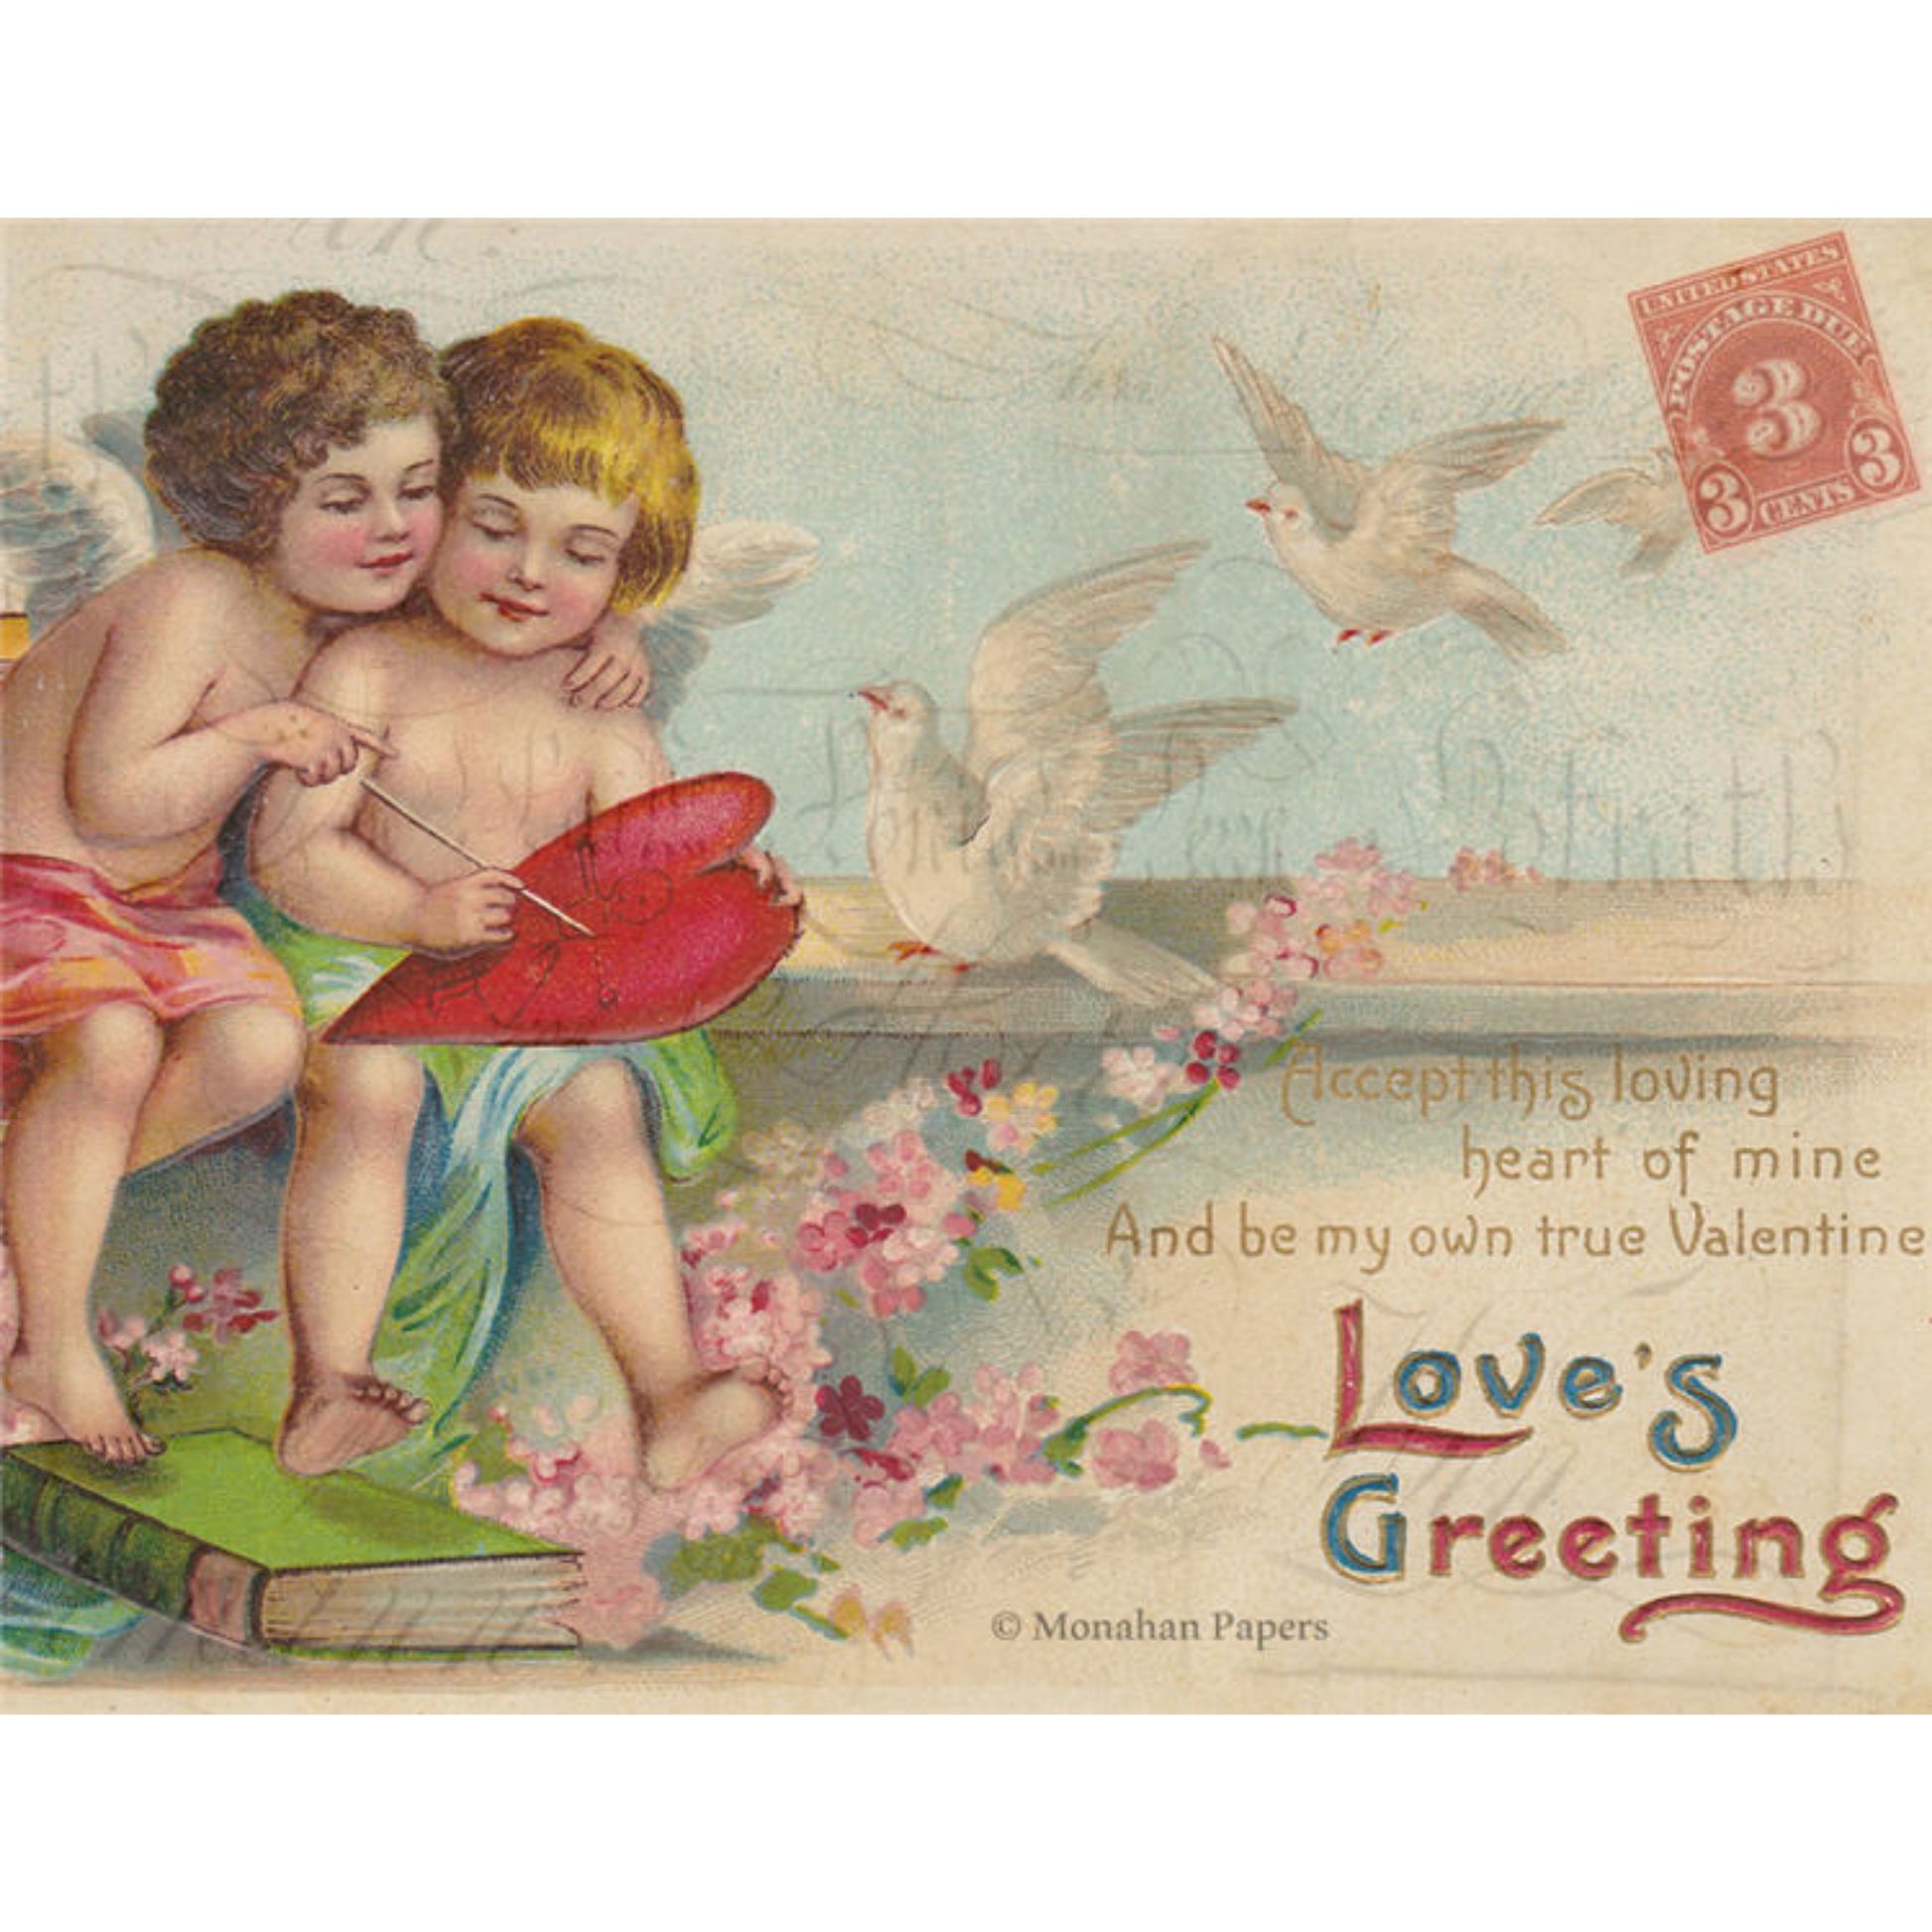 My Own True Valentine V92 Decoupage paper by Monahan Papers available at Milton's Daughter.  11" x 17" Valentine's Day Motif. Pair of cupids holding heart by the sea.